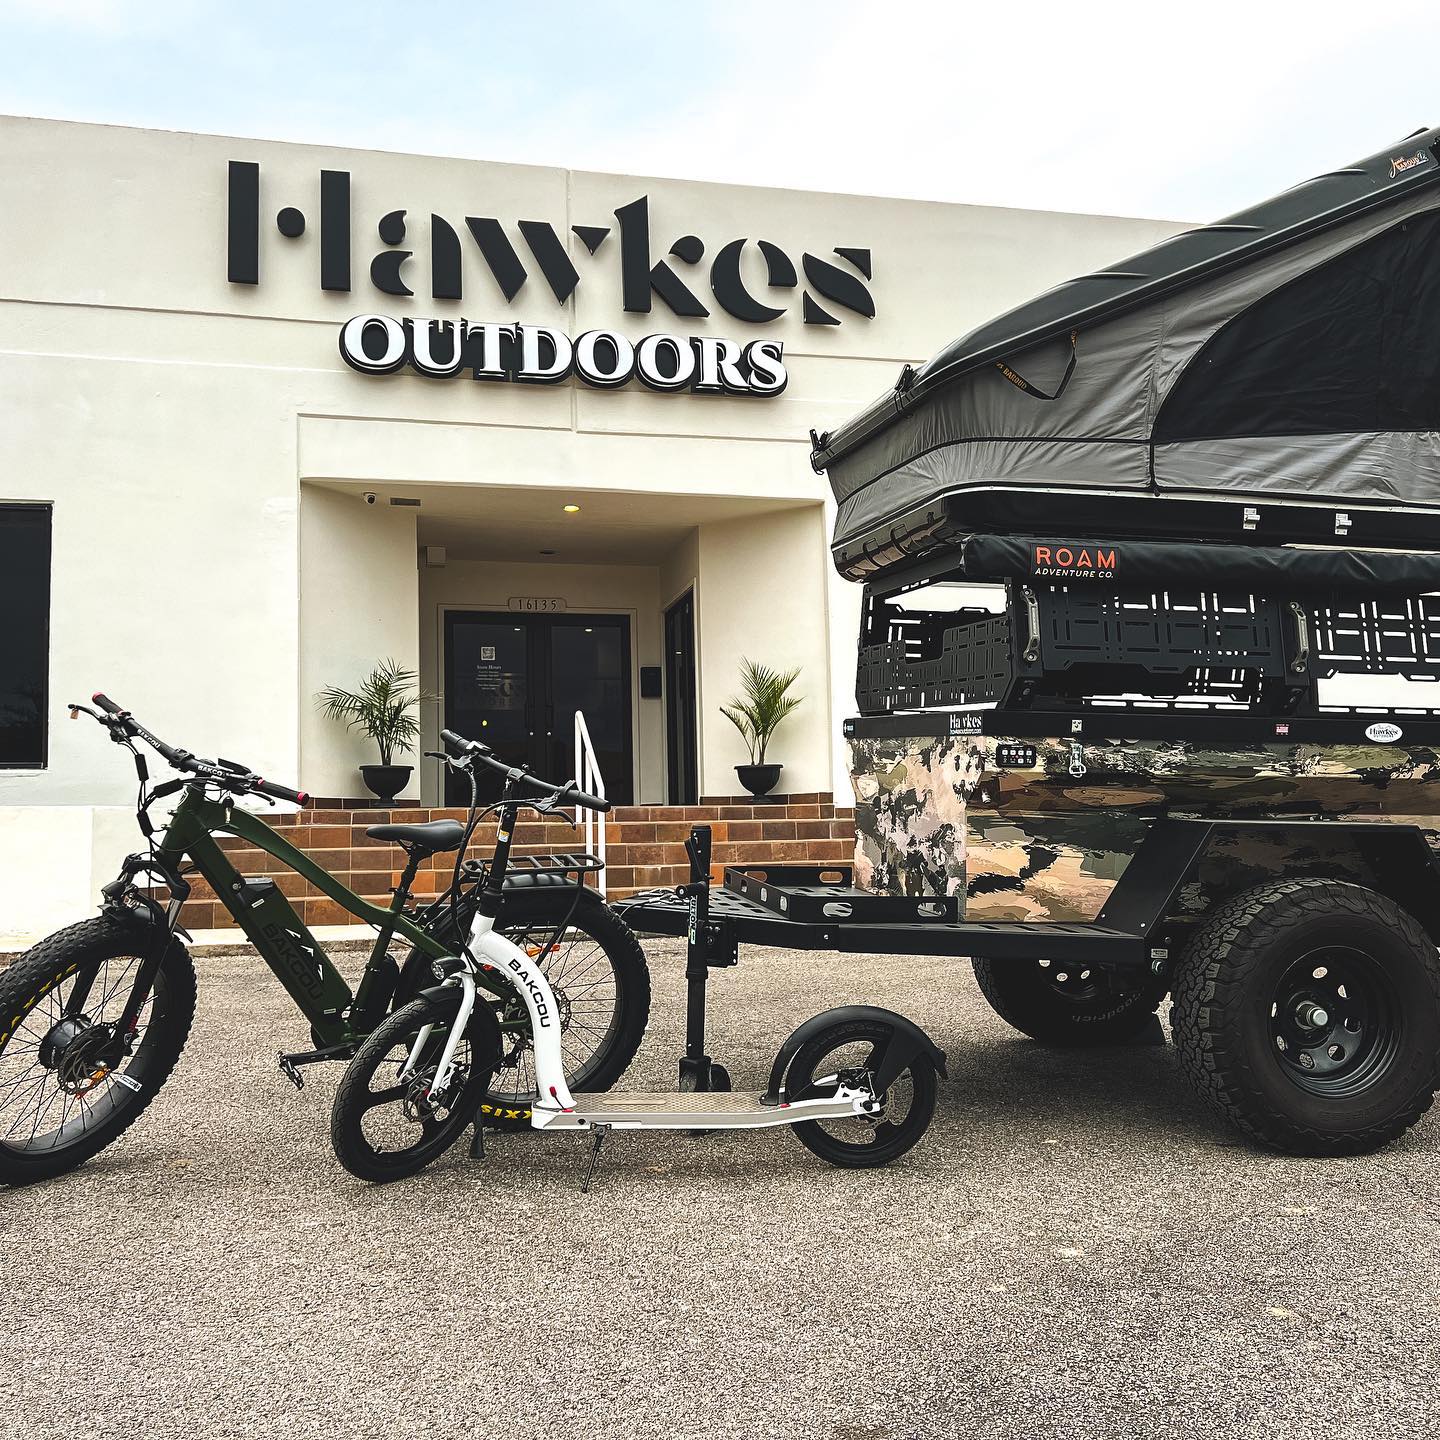 Find new employment opportunities at Hawkes Outdoors in San Antonio, Texas